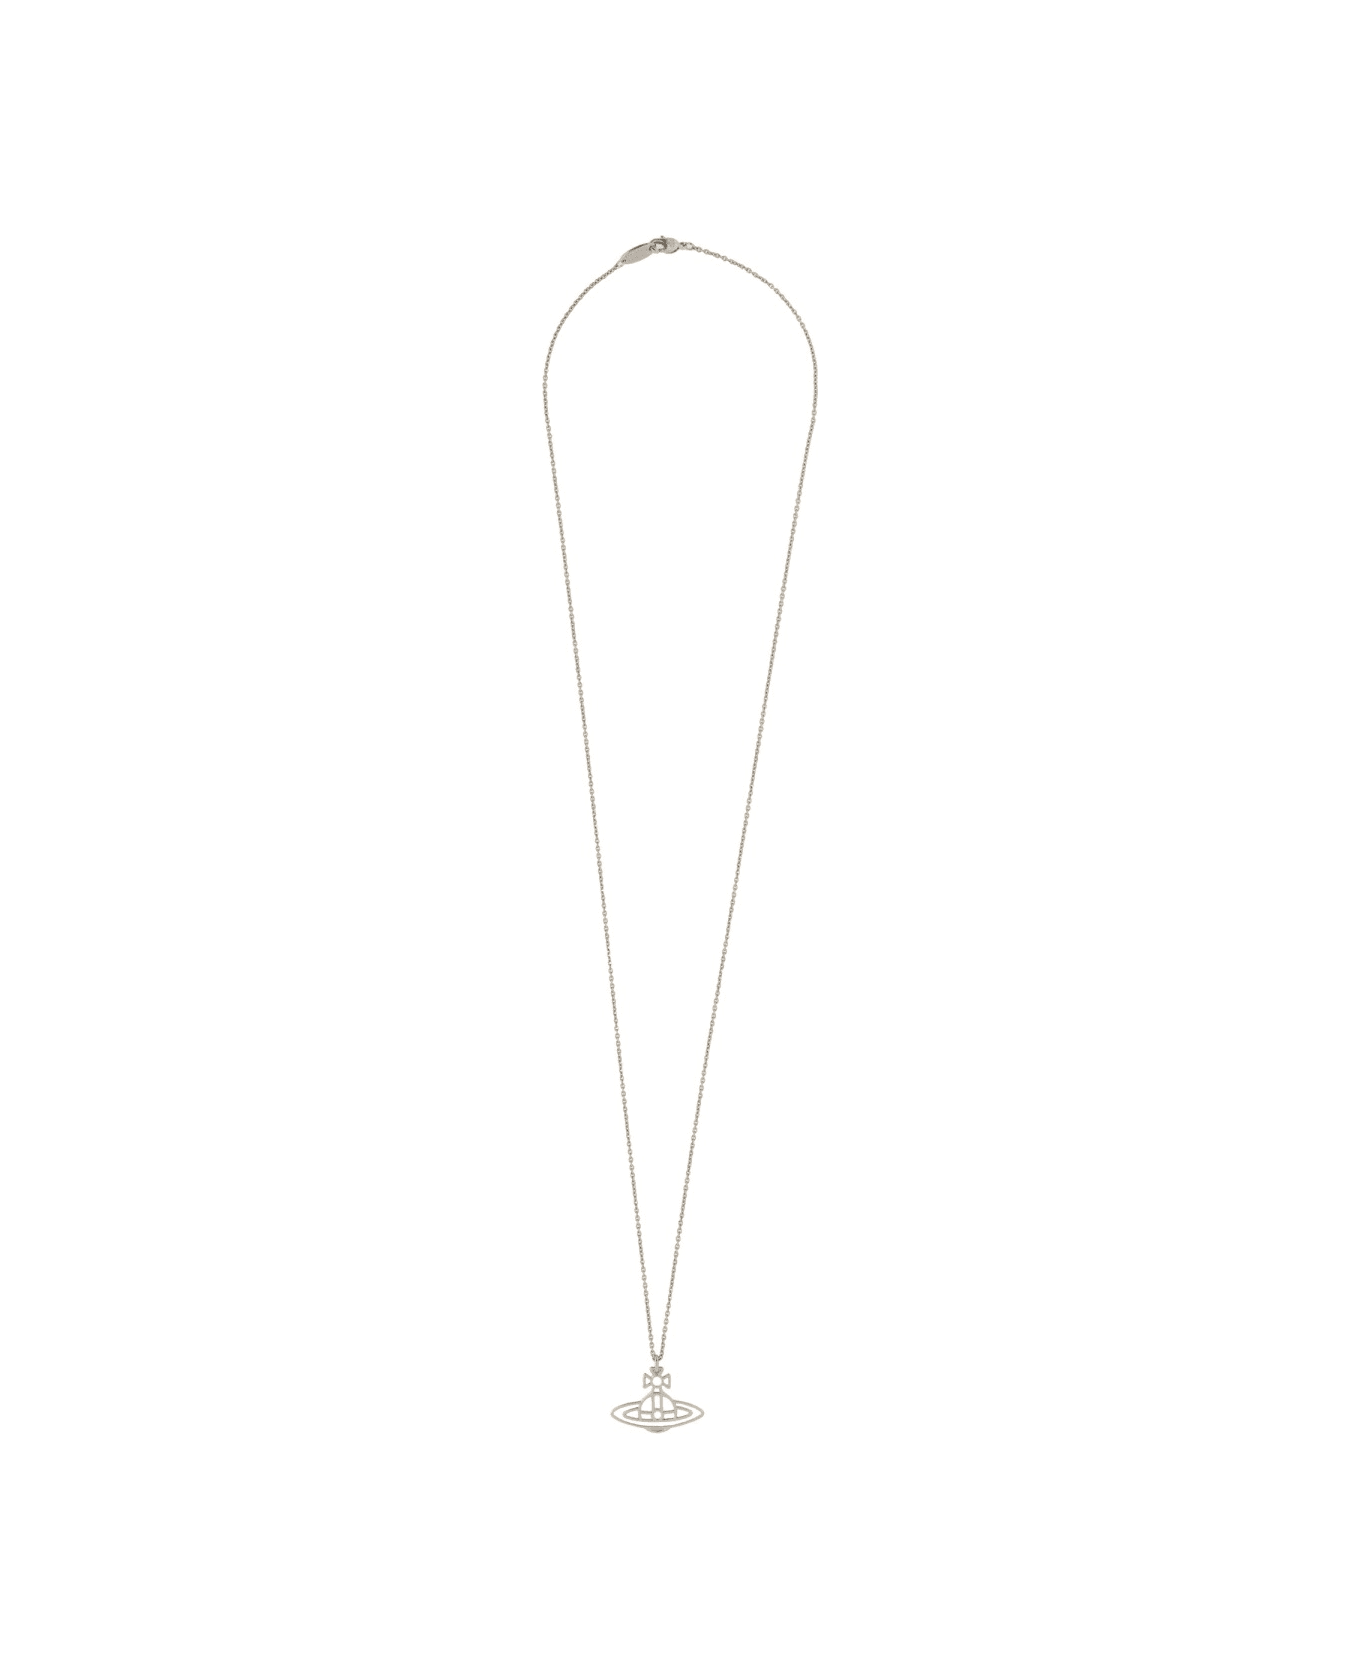 Vivienne Westwood Thin Necklace With Orb Pendant - SILVER